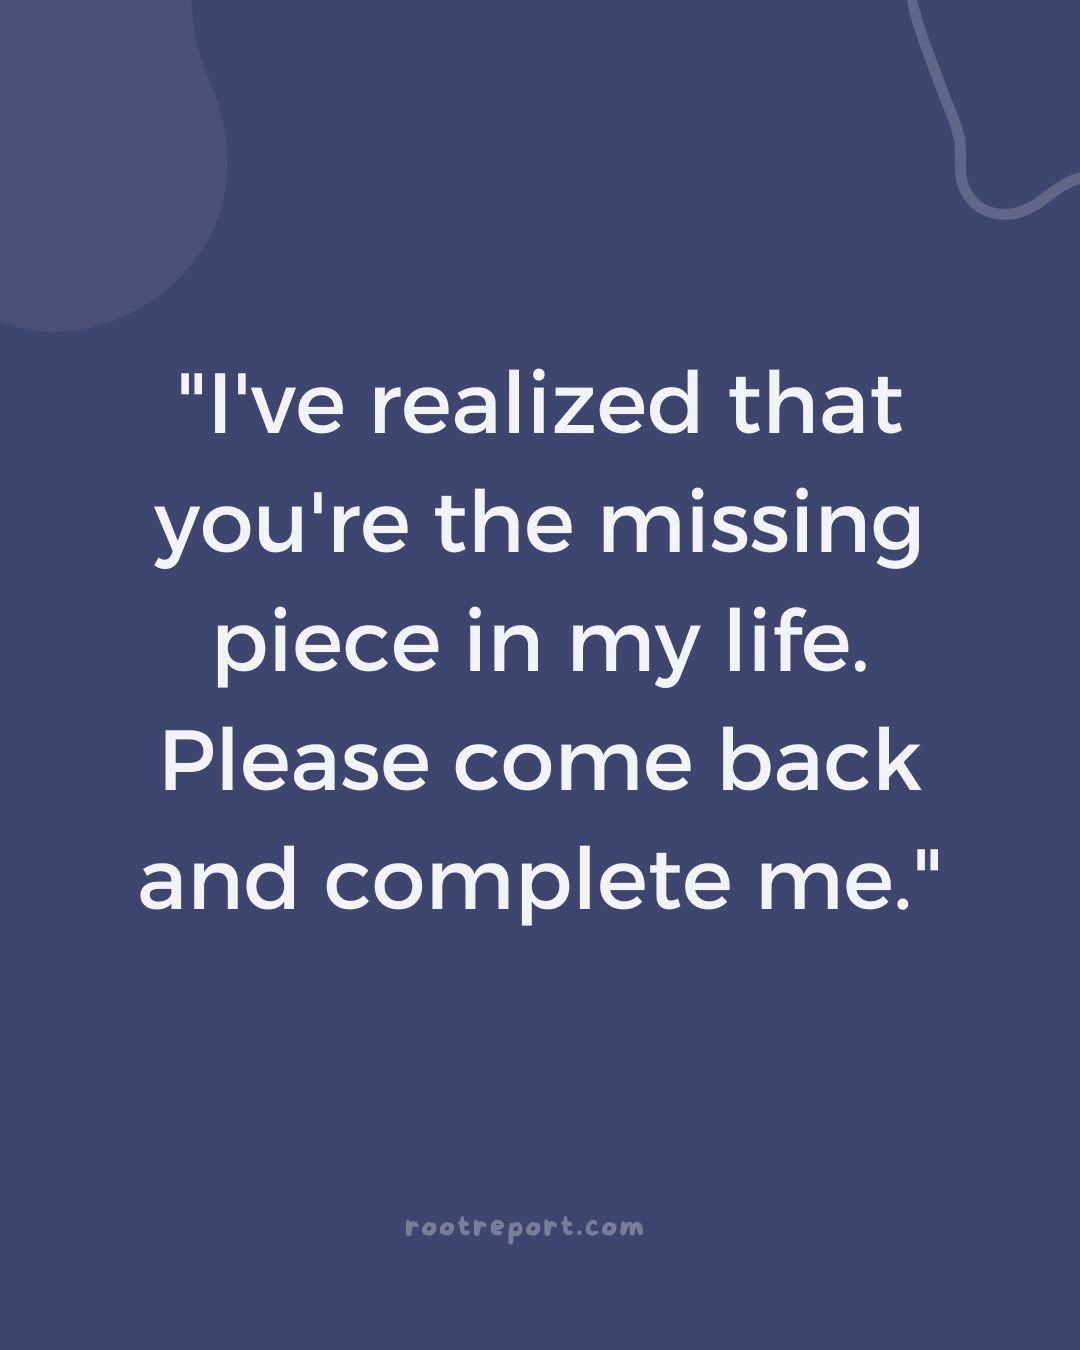 "I've realized that you're the missing piece in my life. Please come back and complete me."